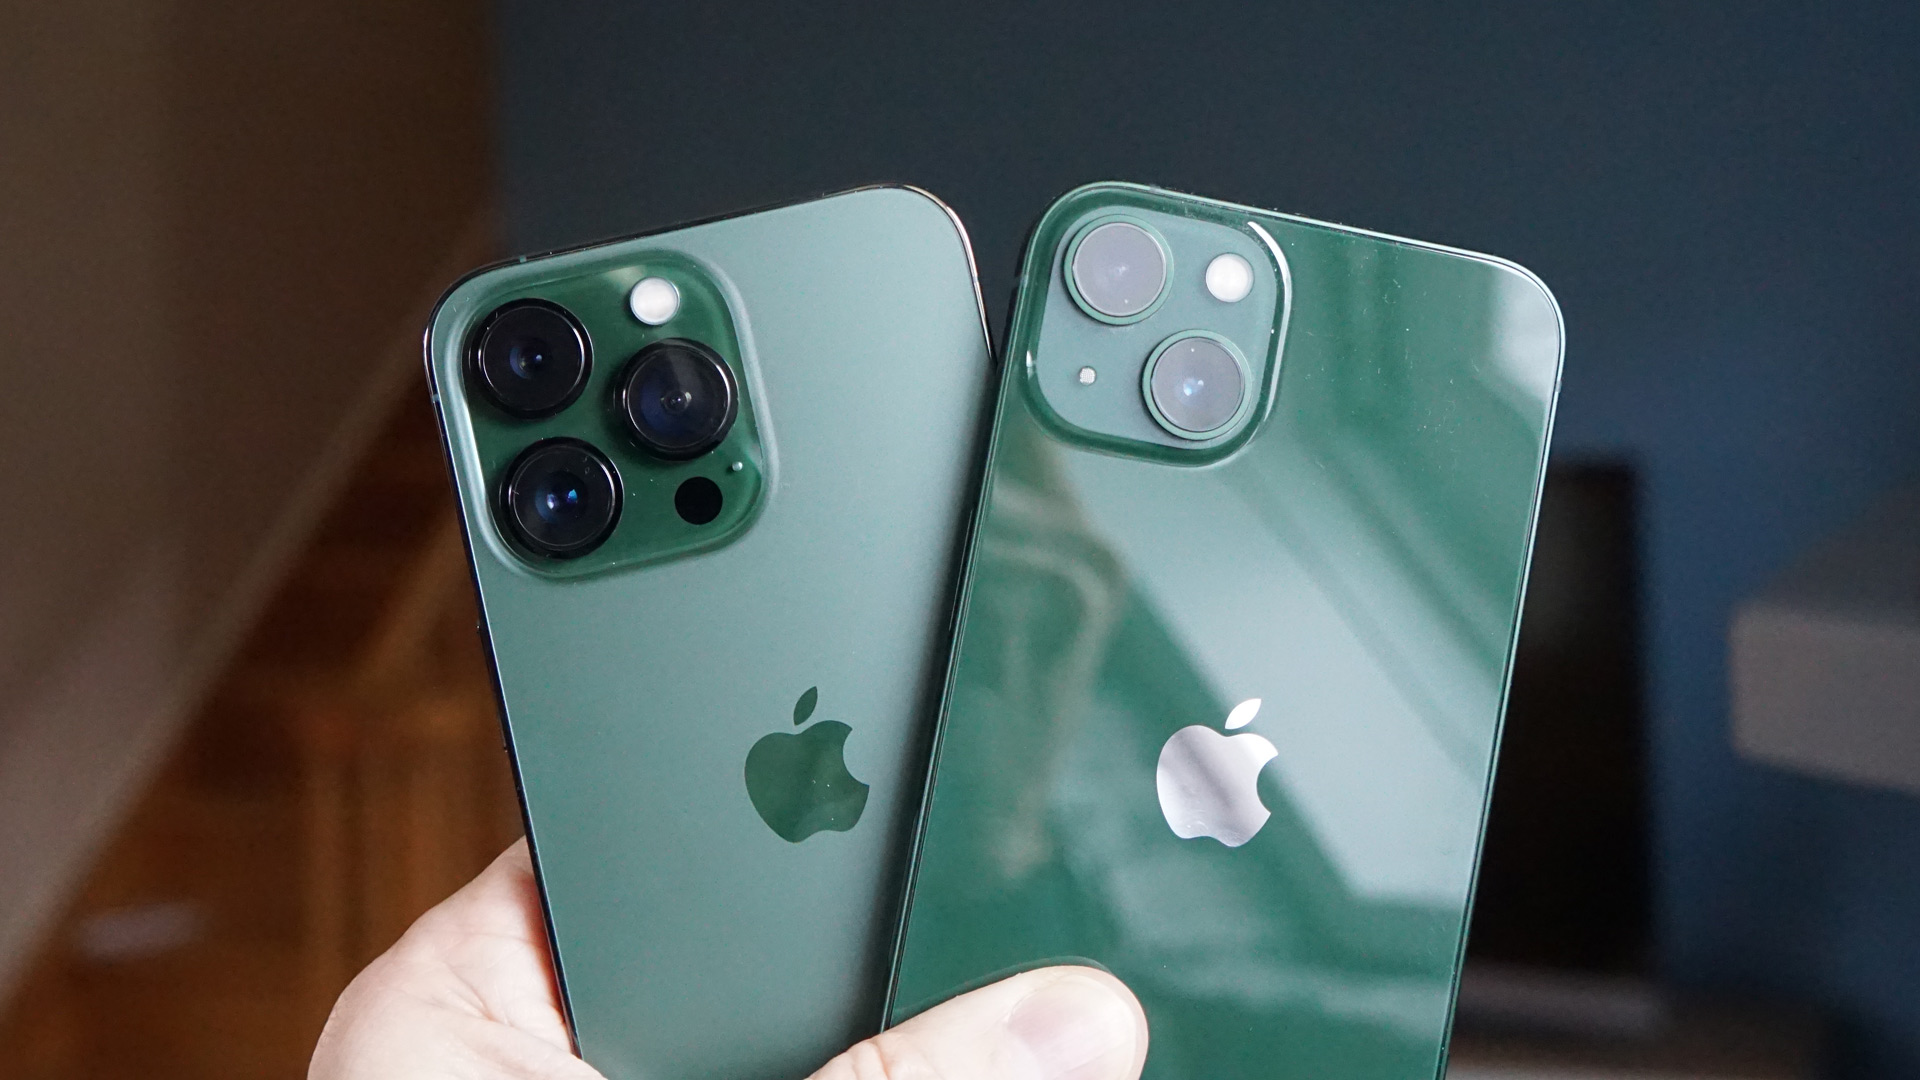 How to pre-order the new green iPhone 13 and iPhone 13 Pro